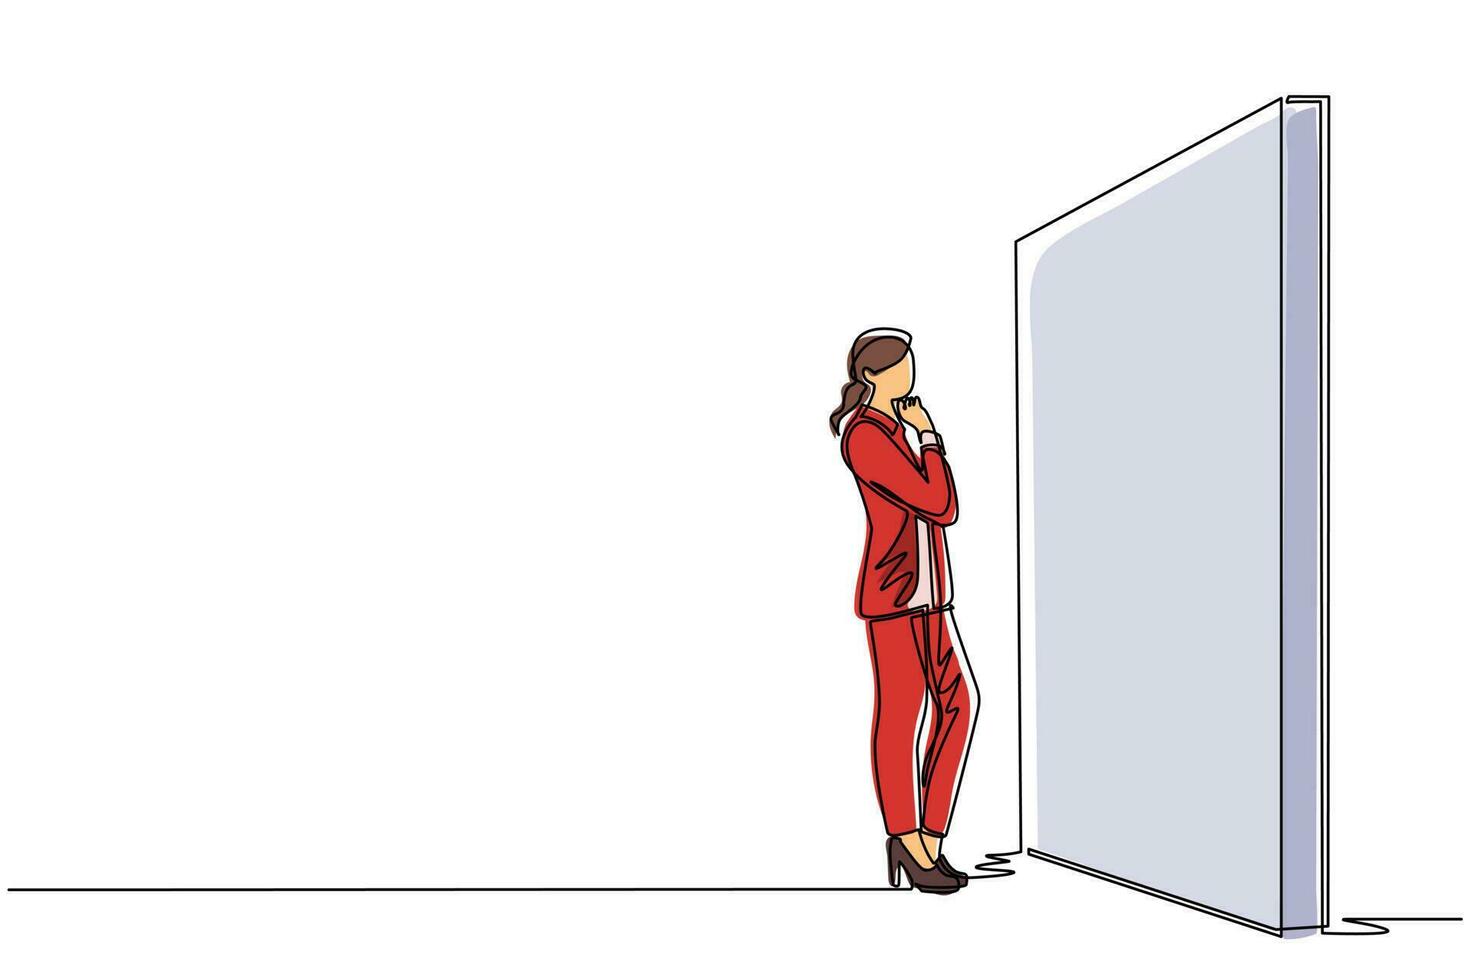 Single continuous line drawing businesswoman thinking in front of big obstacle or wall. Abstract representing risk management. Finding solution and problem solving concept. One line draw design vector